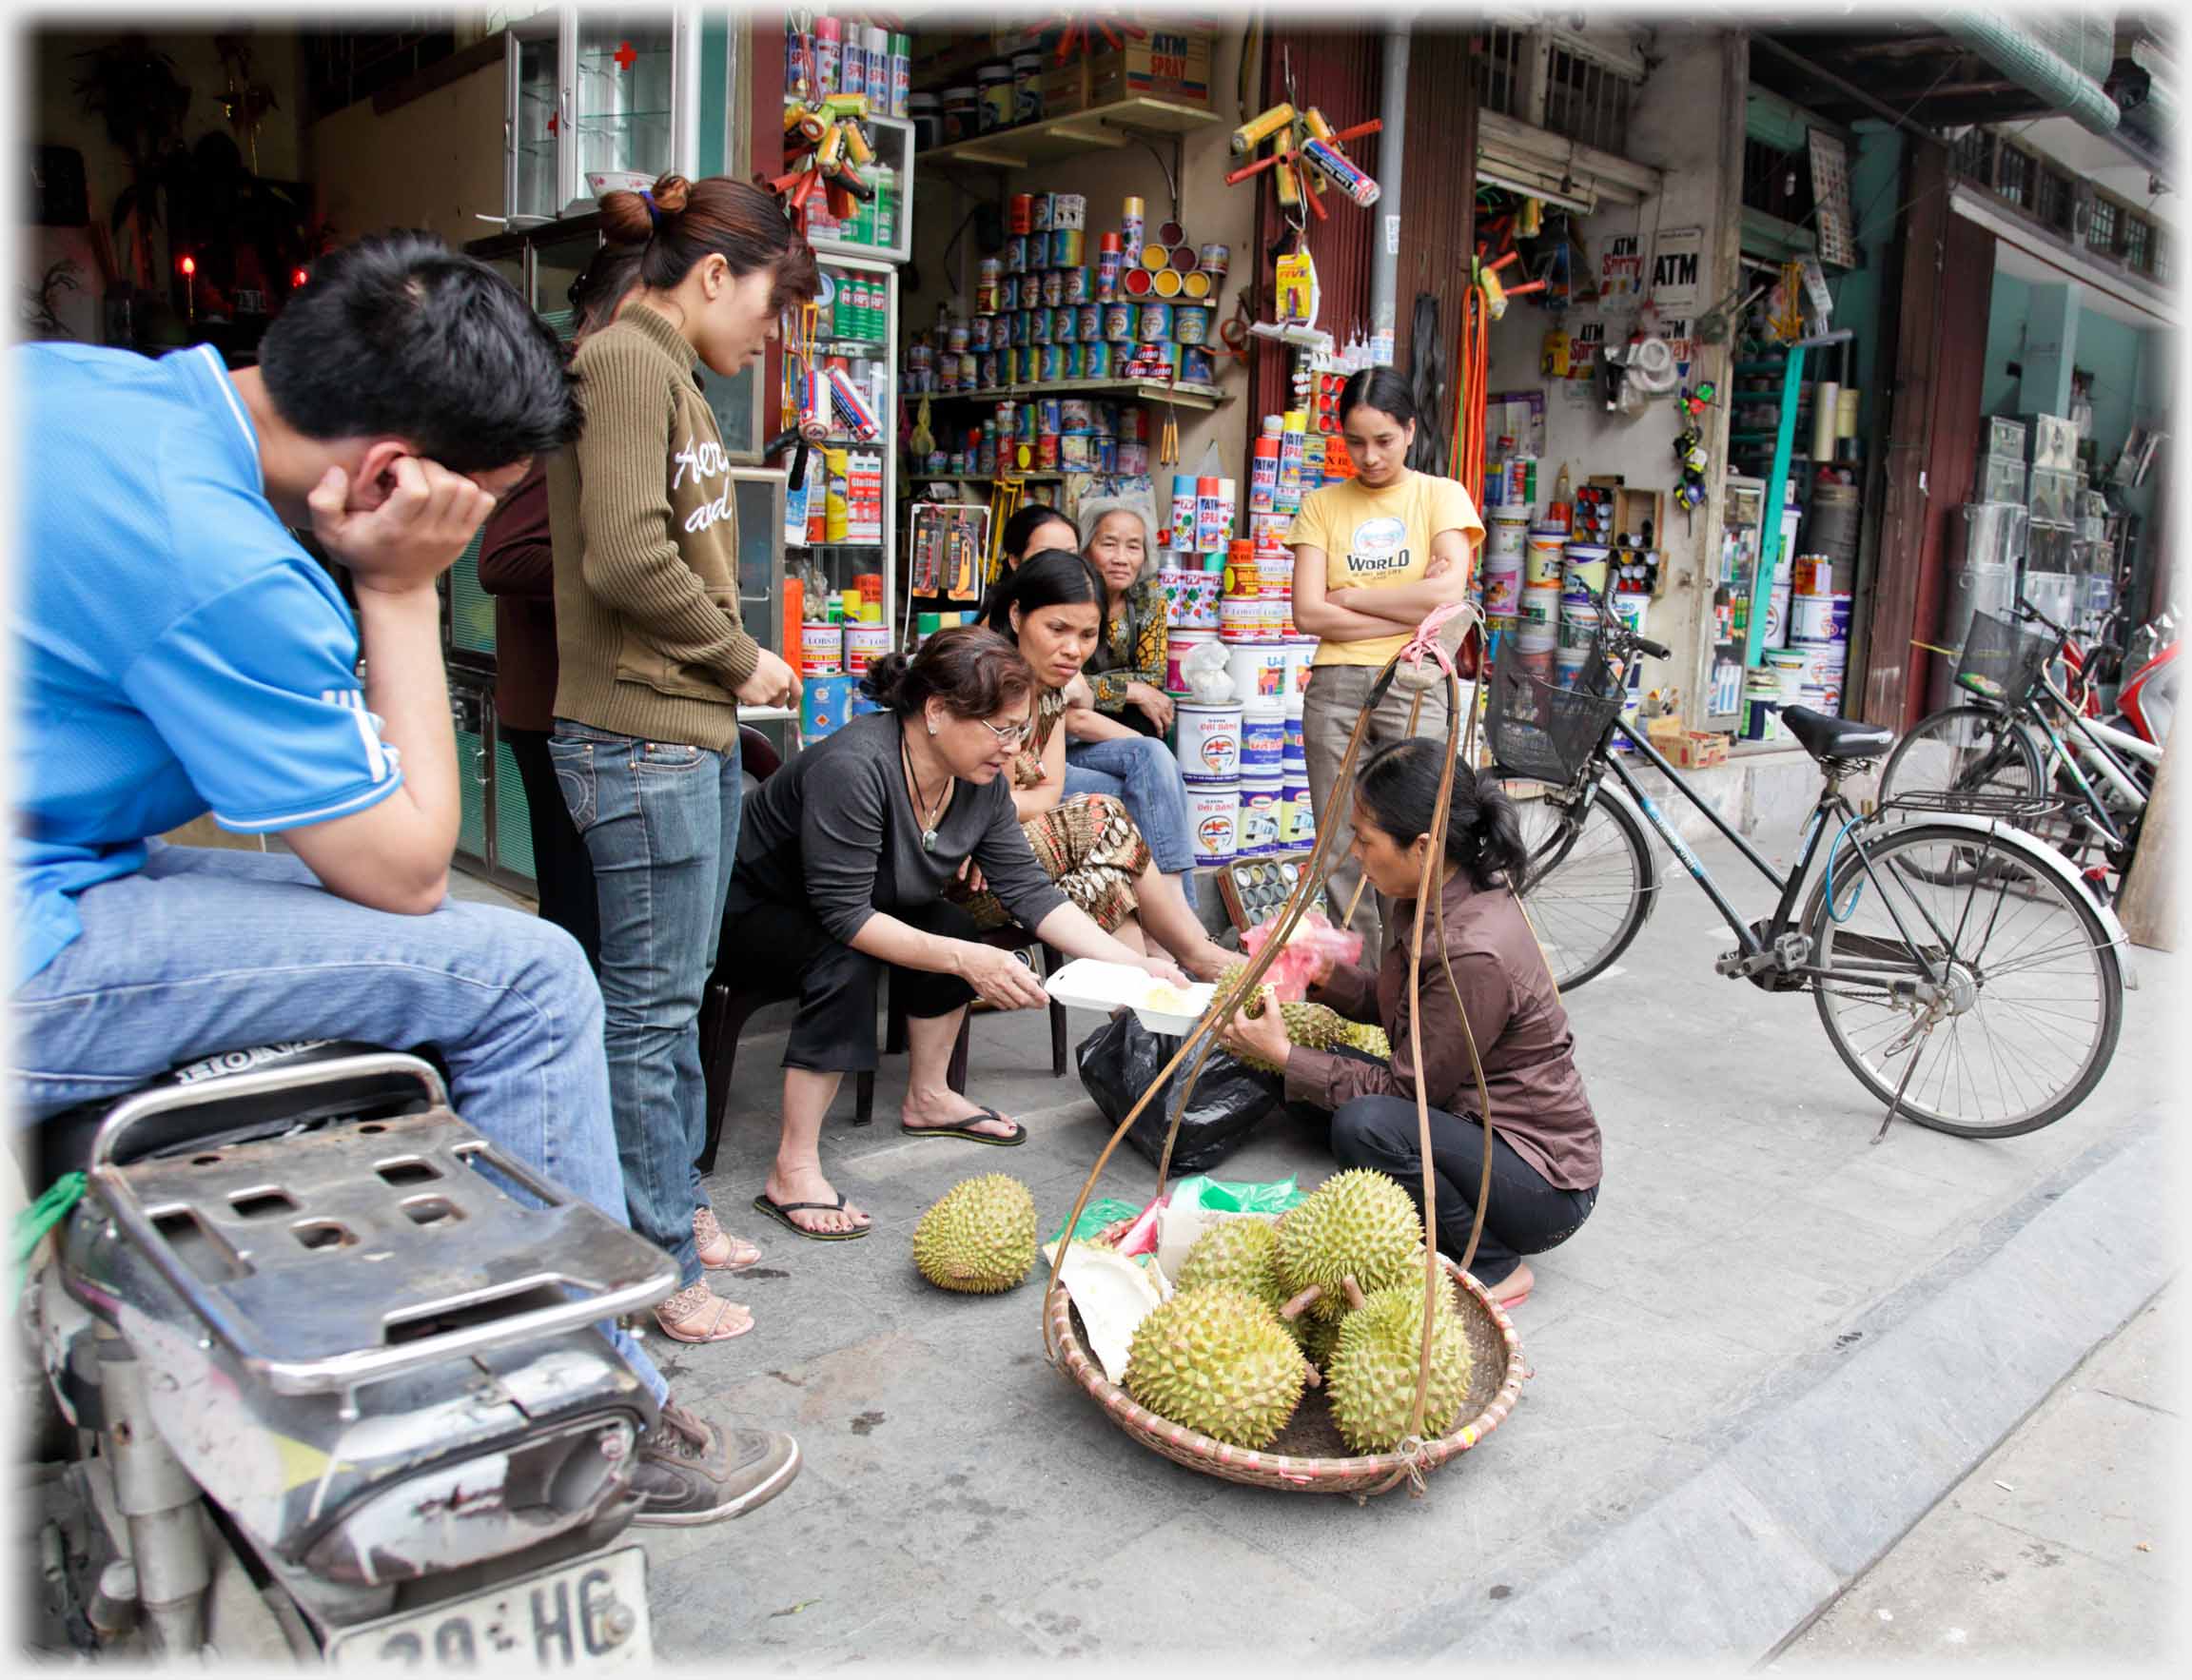 Six women and a man on a motorbike watching a woman cut up a durian.